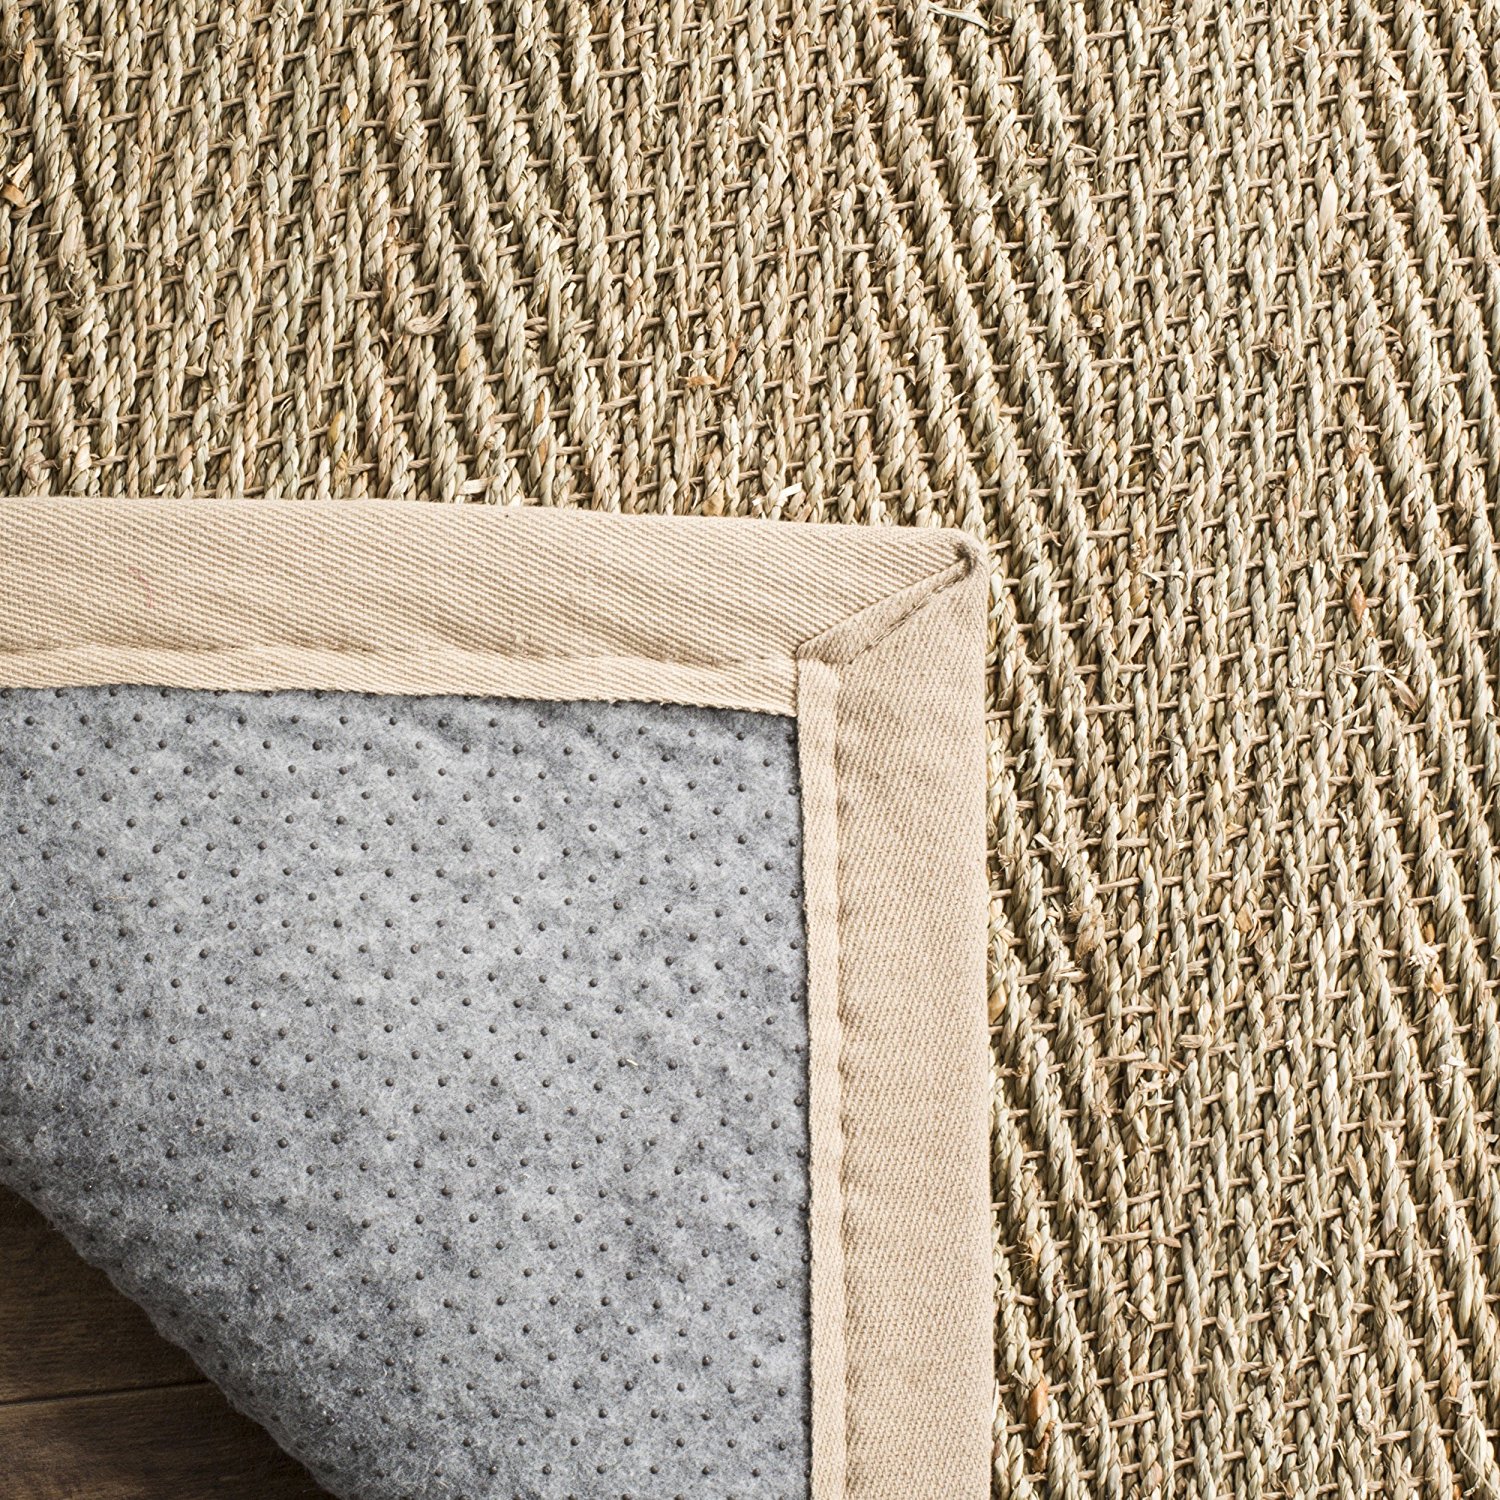 Safavieh Natural Fiber Collection NF115A Herringbone Natural and Beige Seagrass Area Rug 